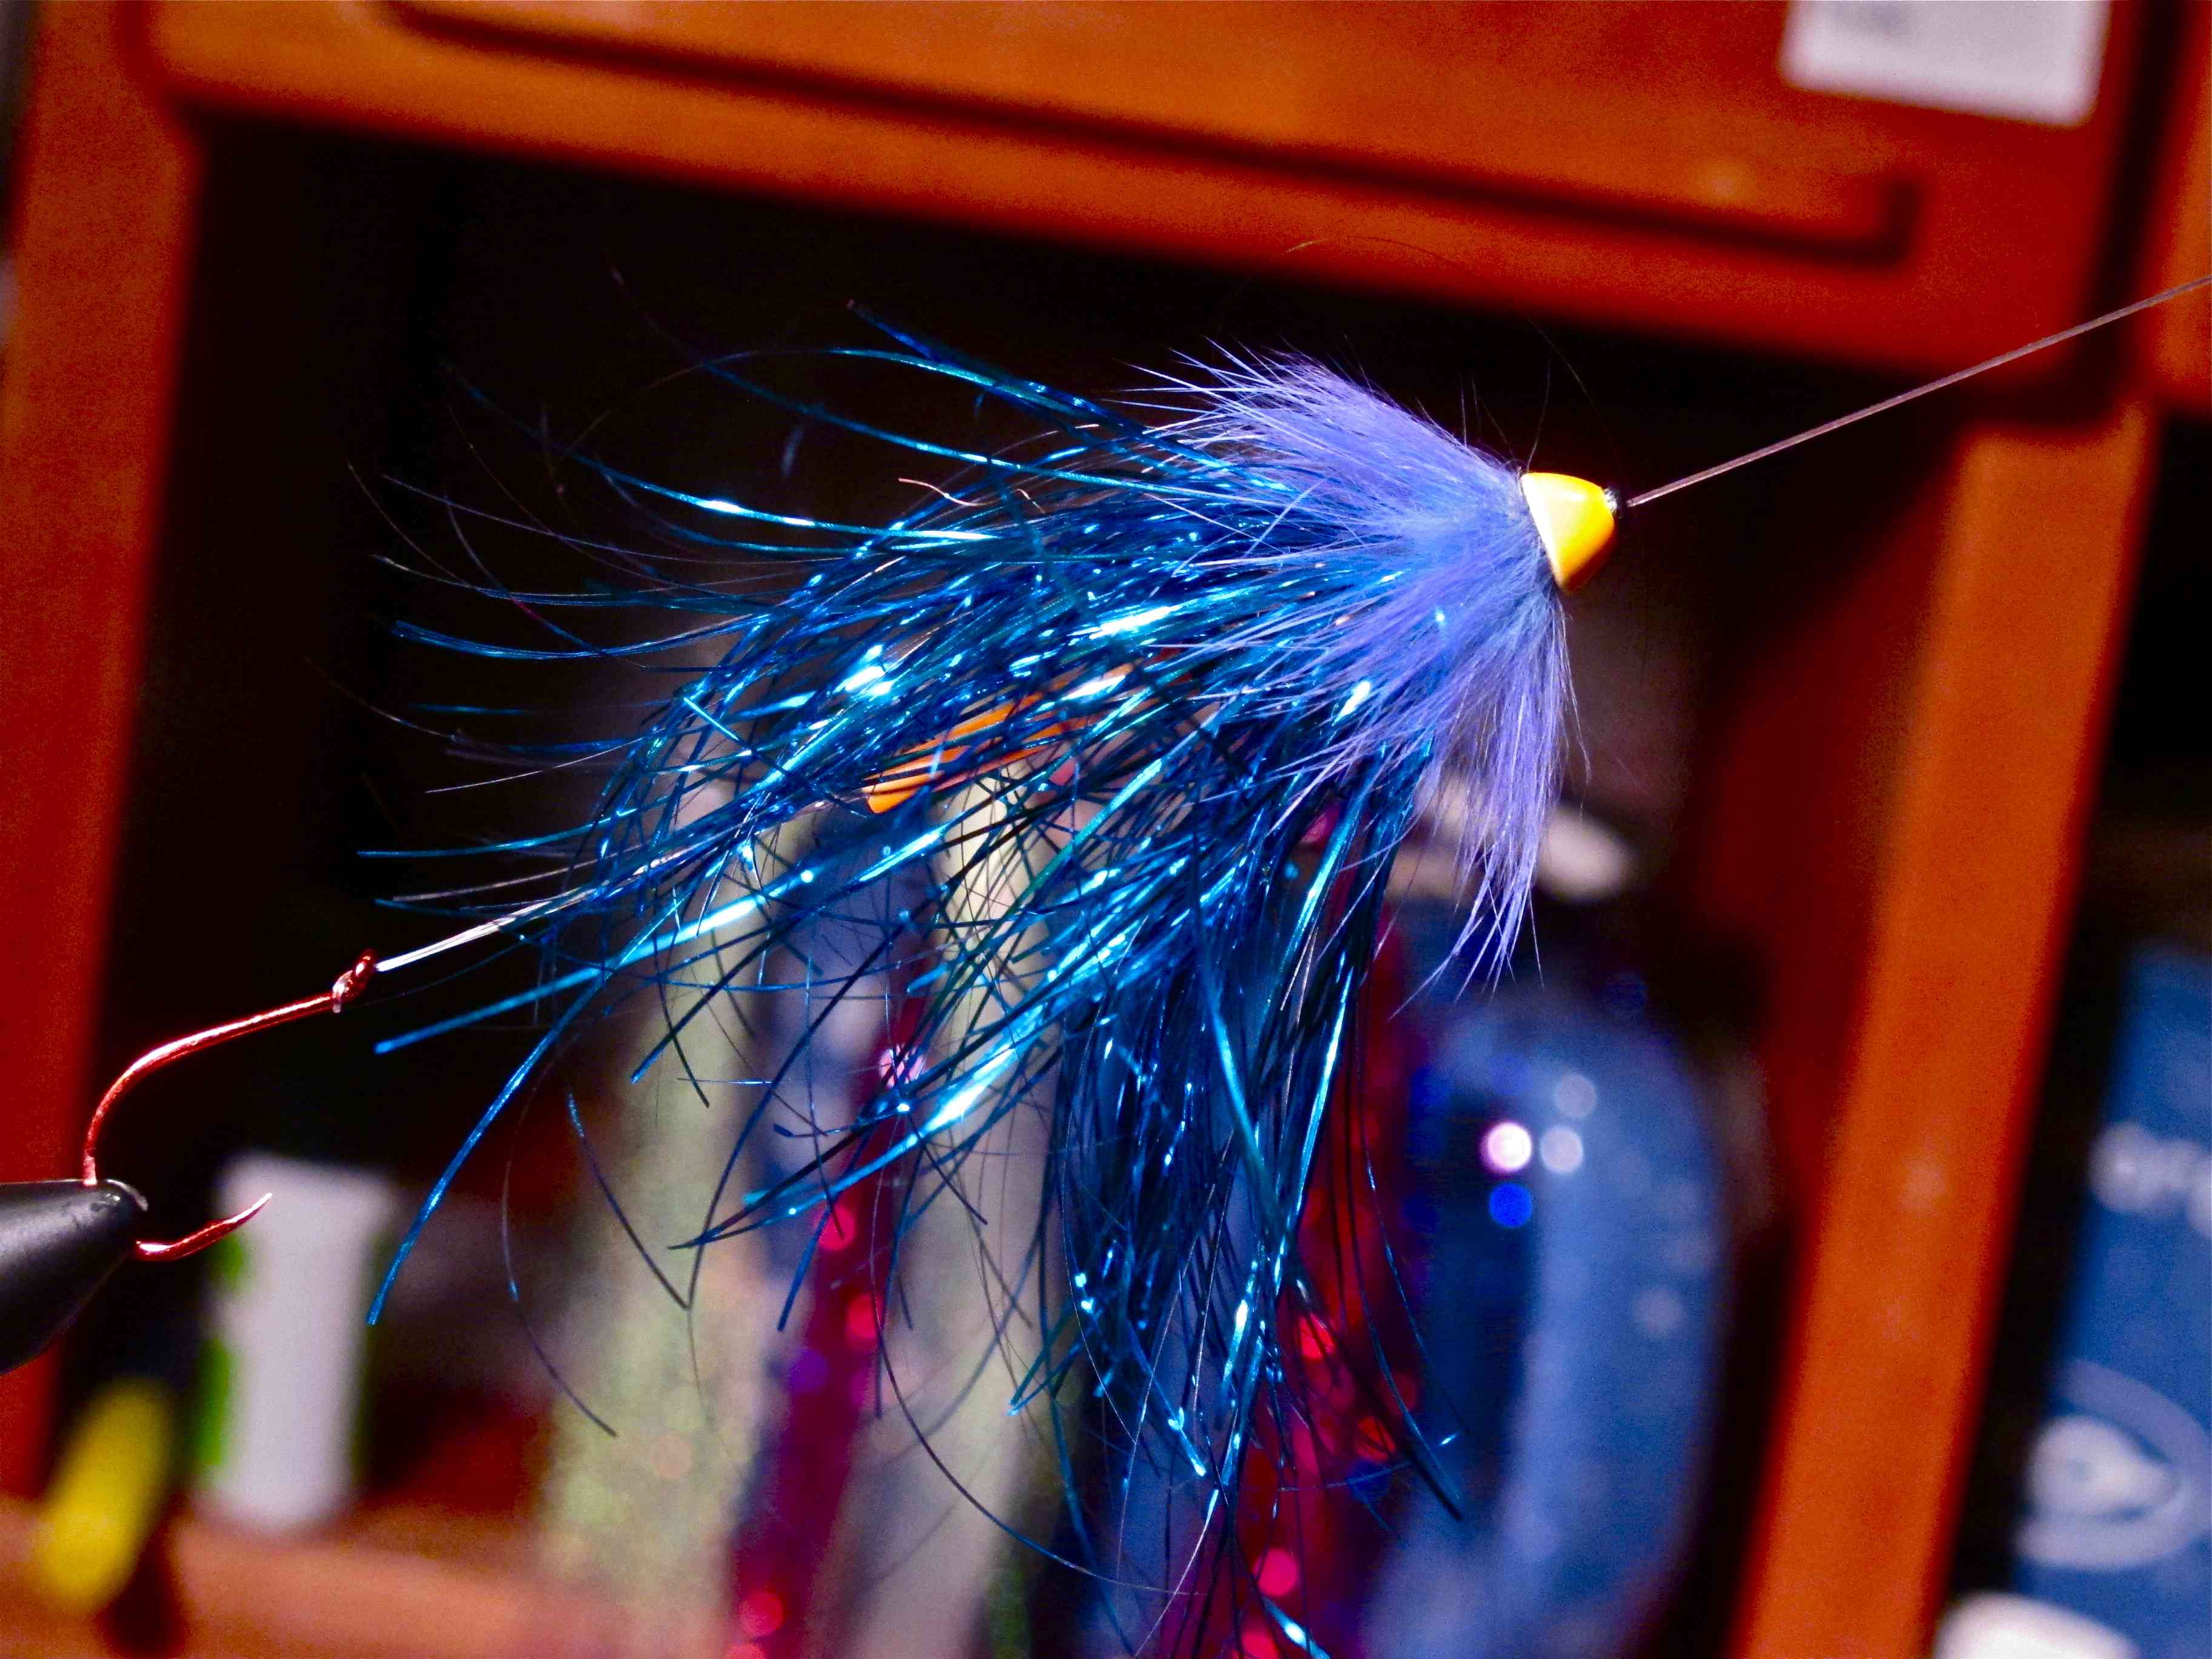 Jay's Flies | Fishing - and Life - With Jay